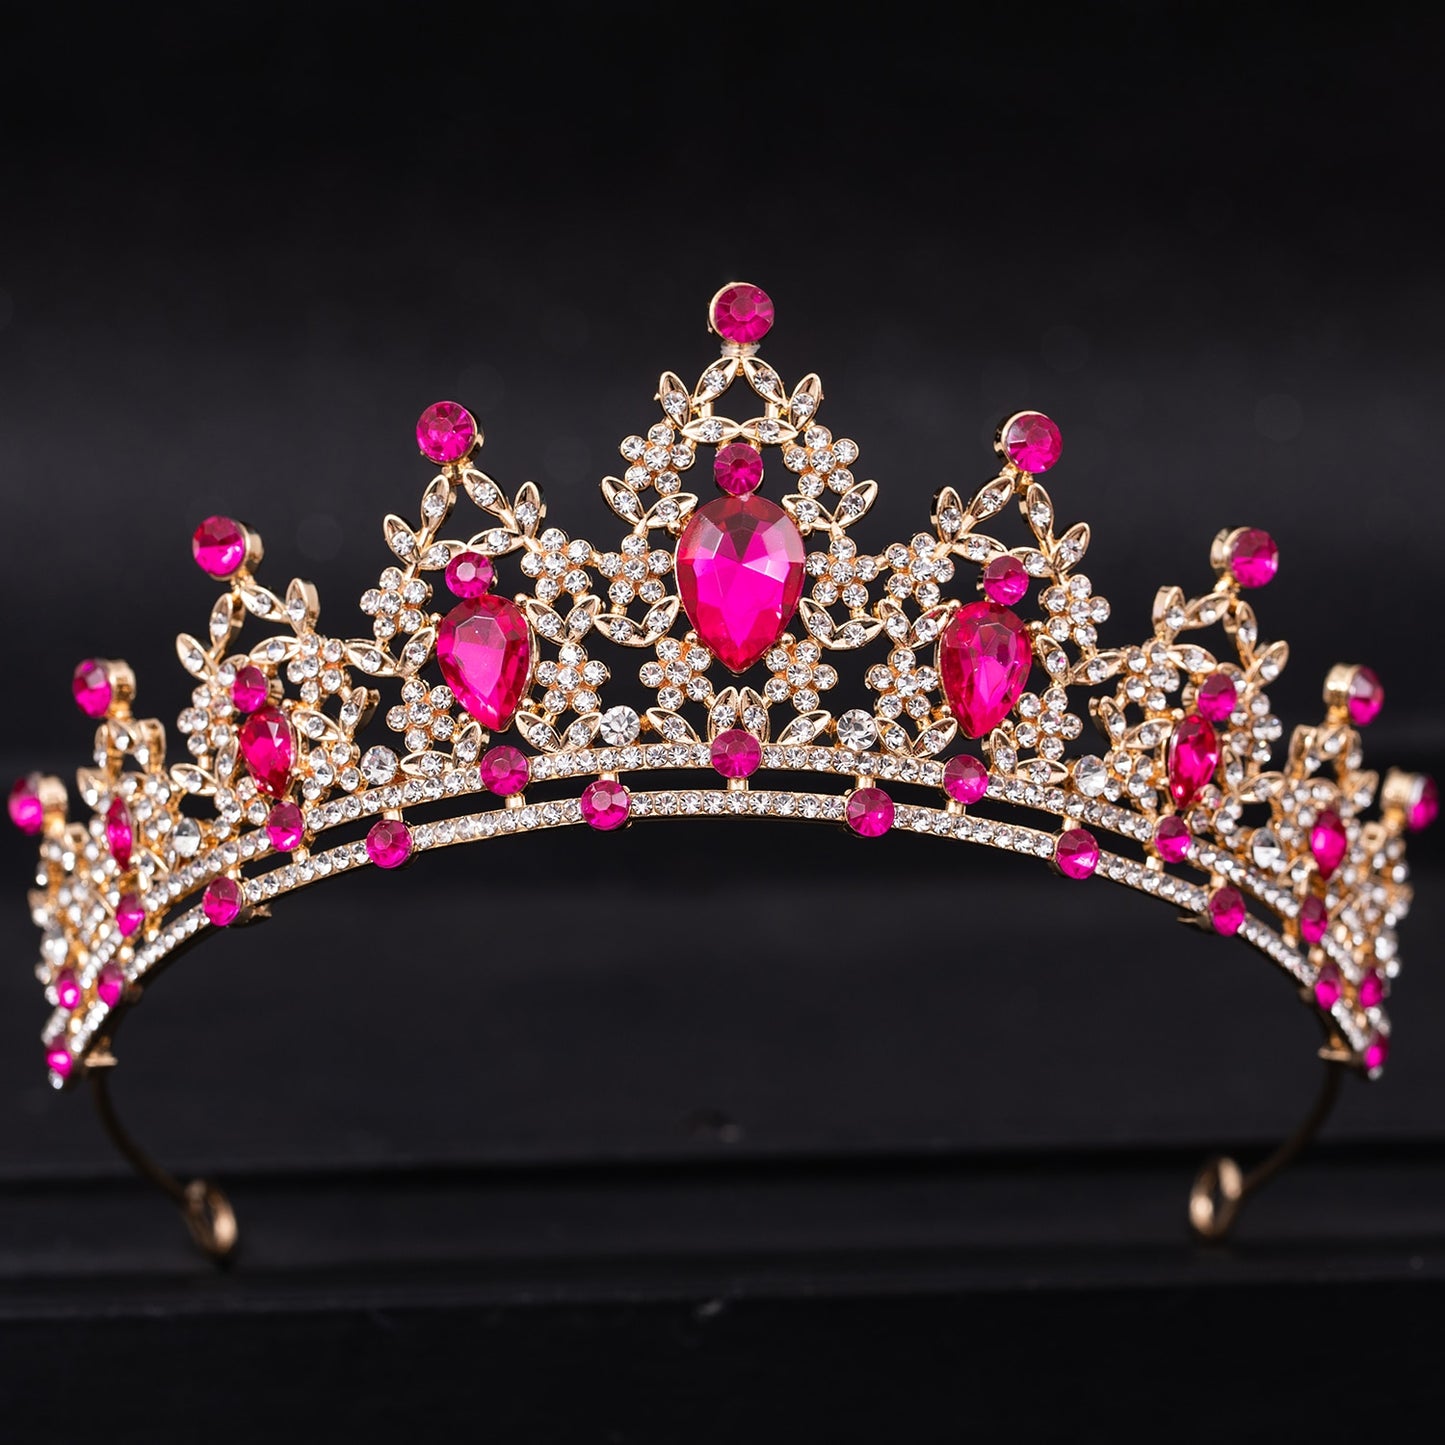 Crystal Tiara Crown Party  Hair Accessories Head Jewelry In Many Colors